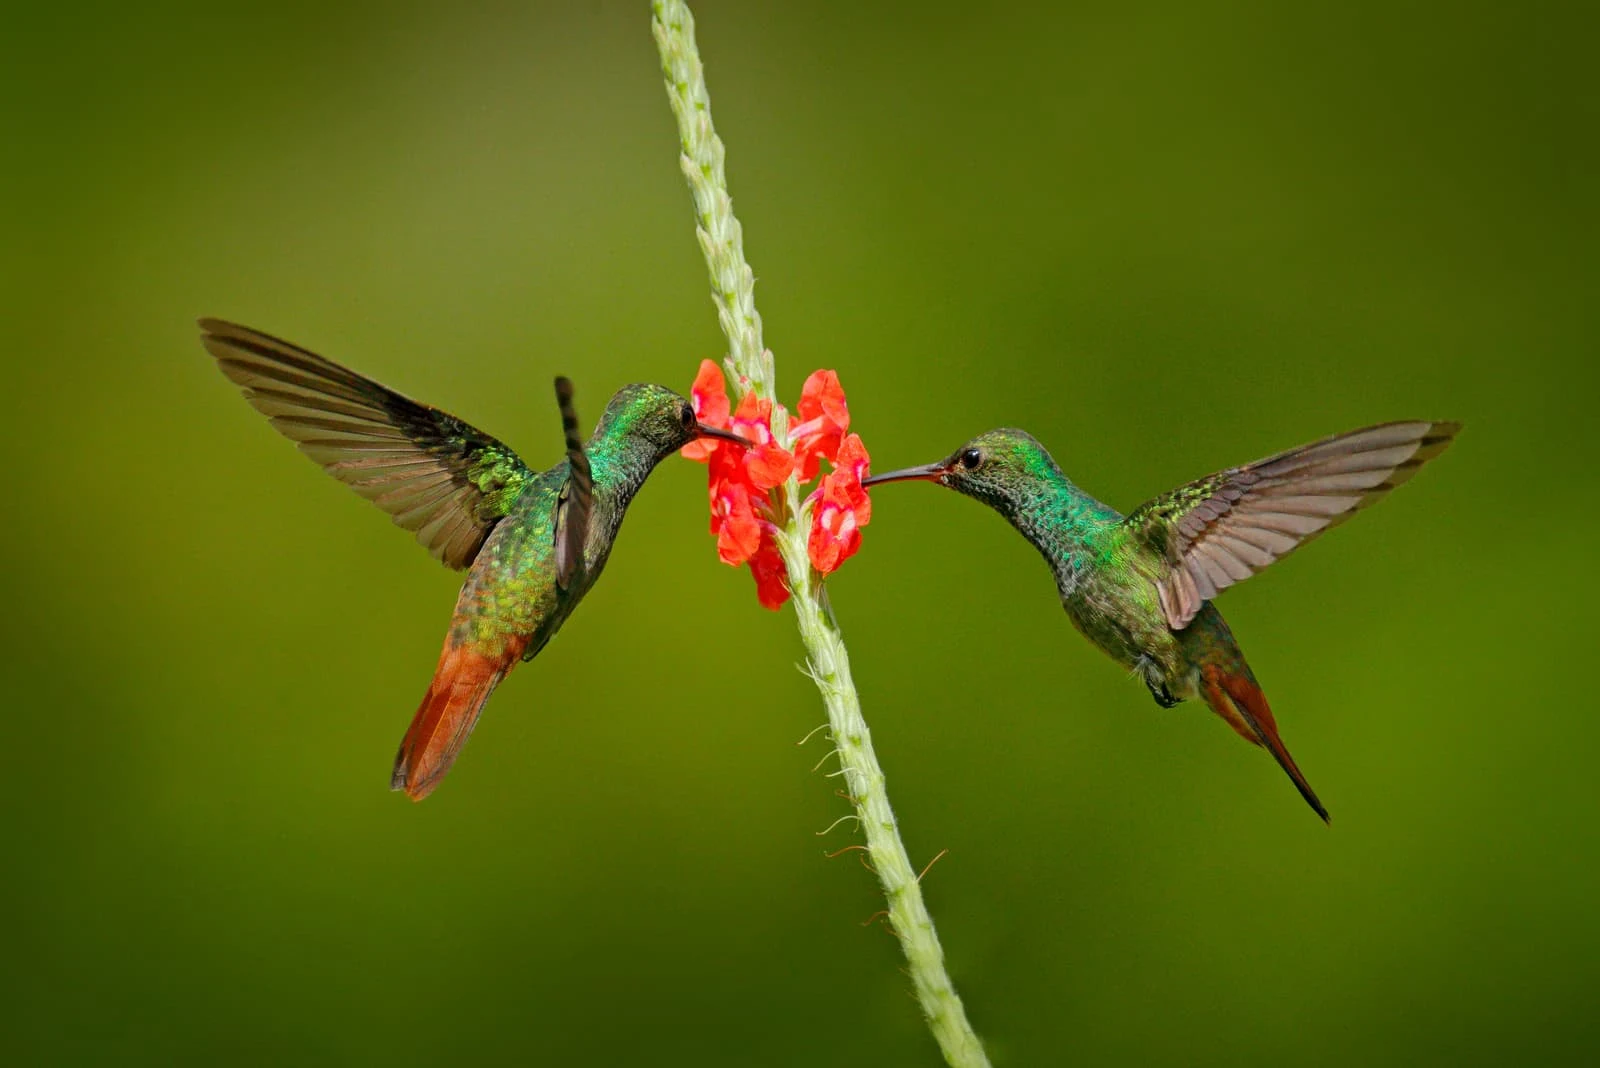 two hummingbirds on the red flower